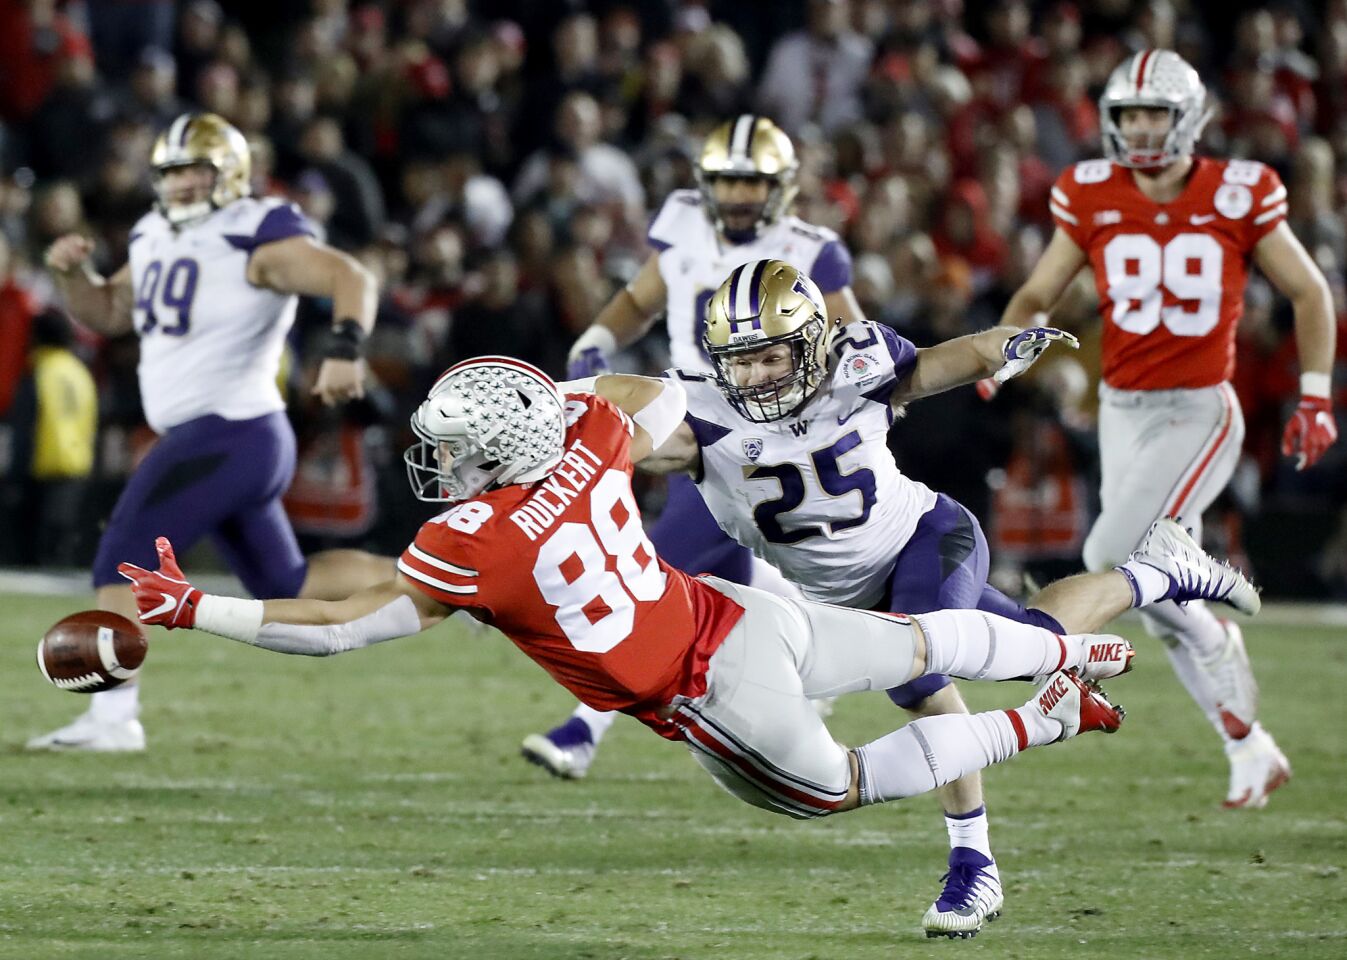 Ohio State tight end Jeremy Rickert can't reach a pass from quarterback Dwayne Haskins Jr. as Washington's Ben Burr-Kirven covers in the fourth quarter.